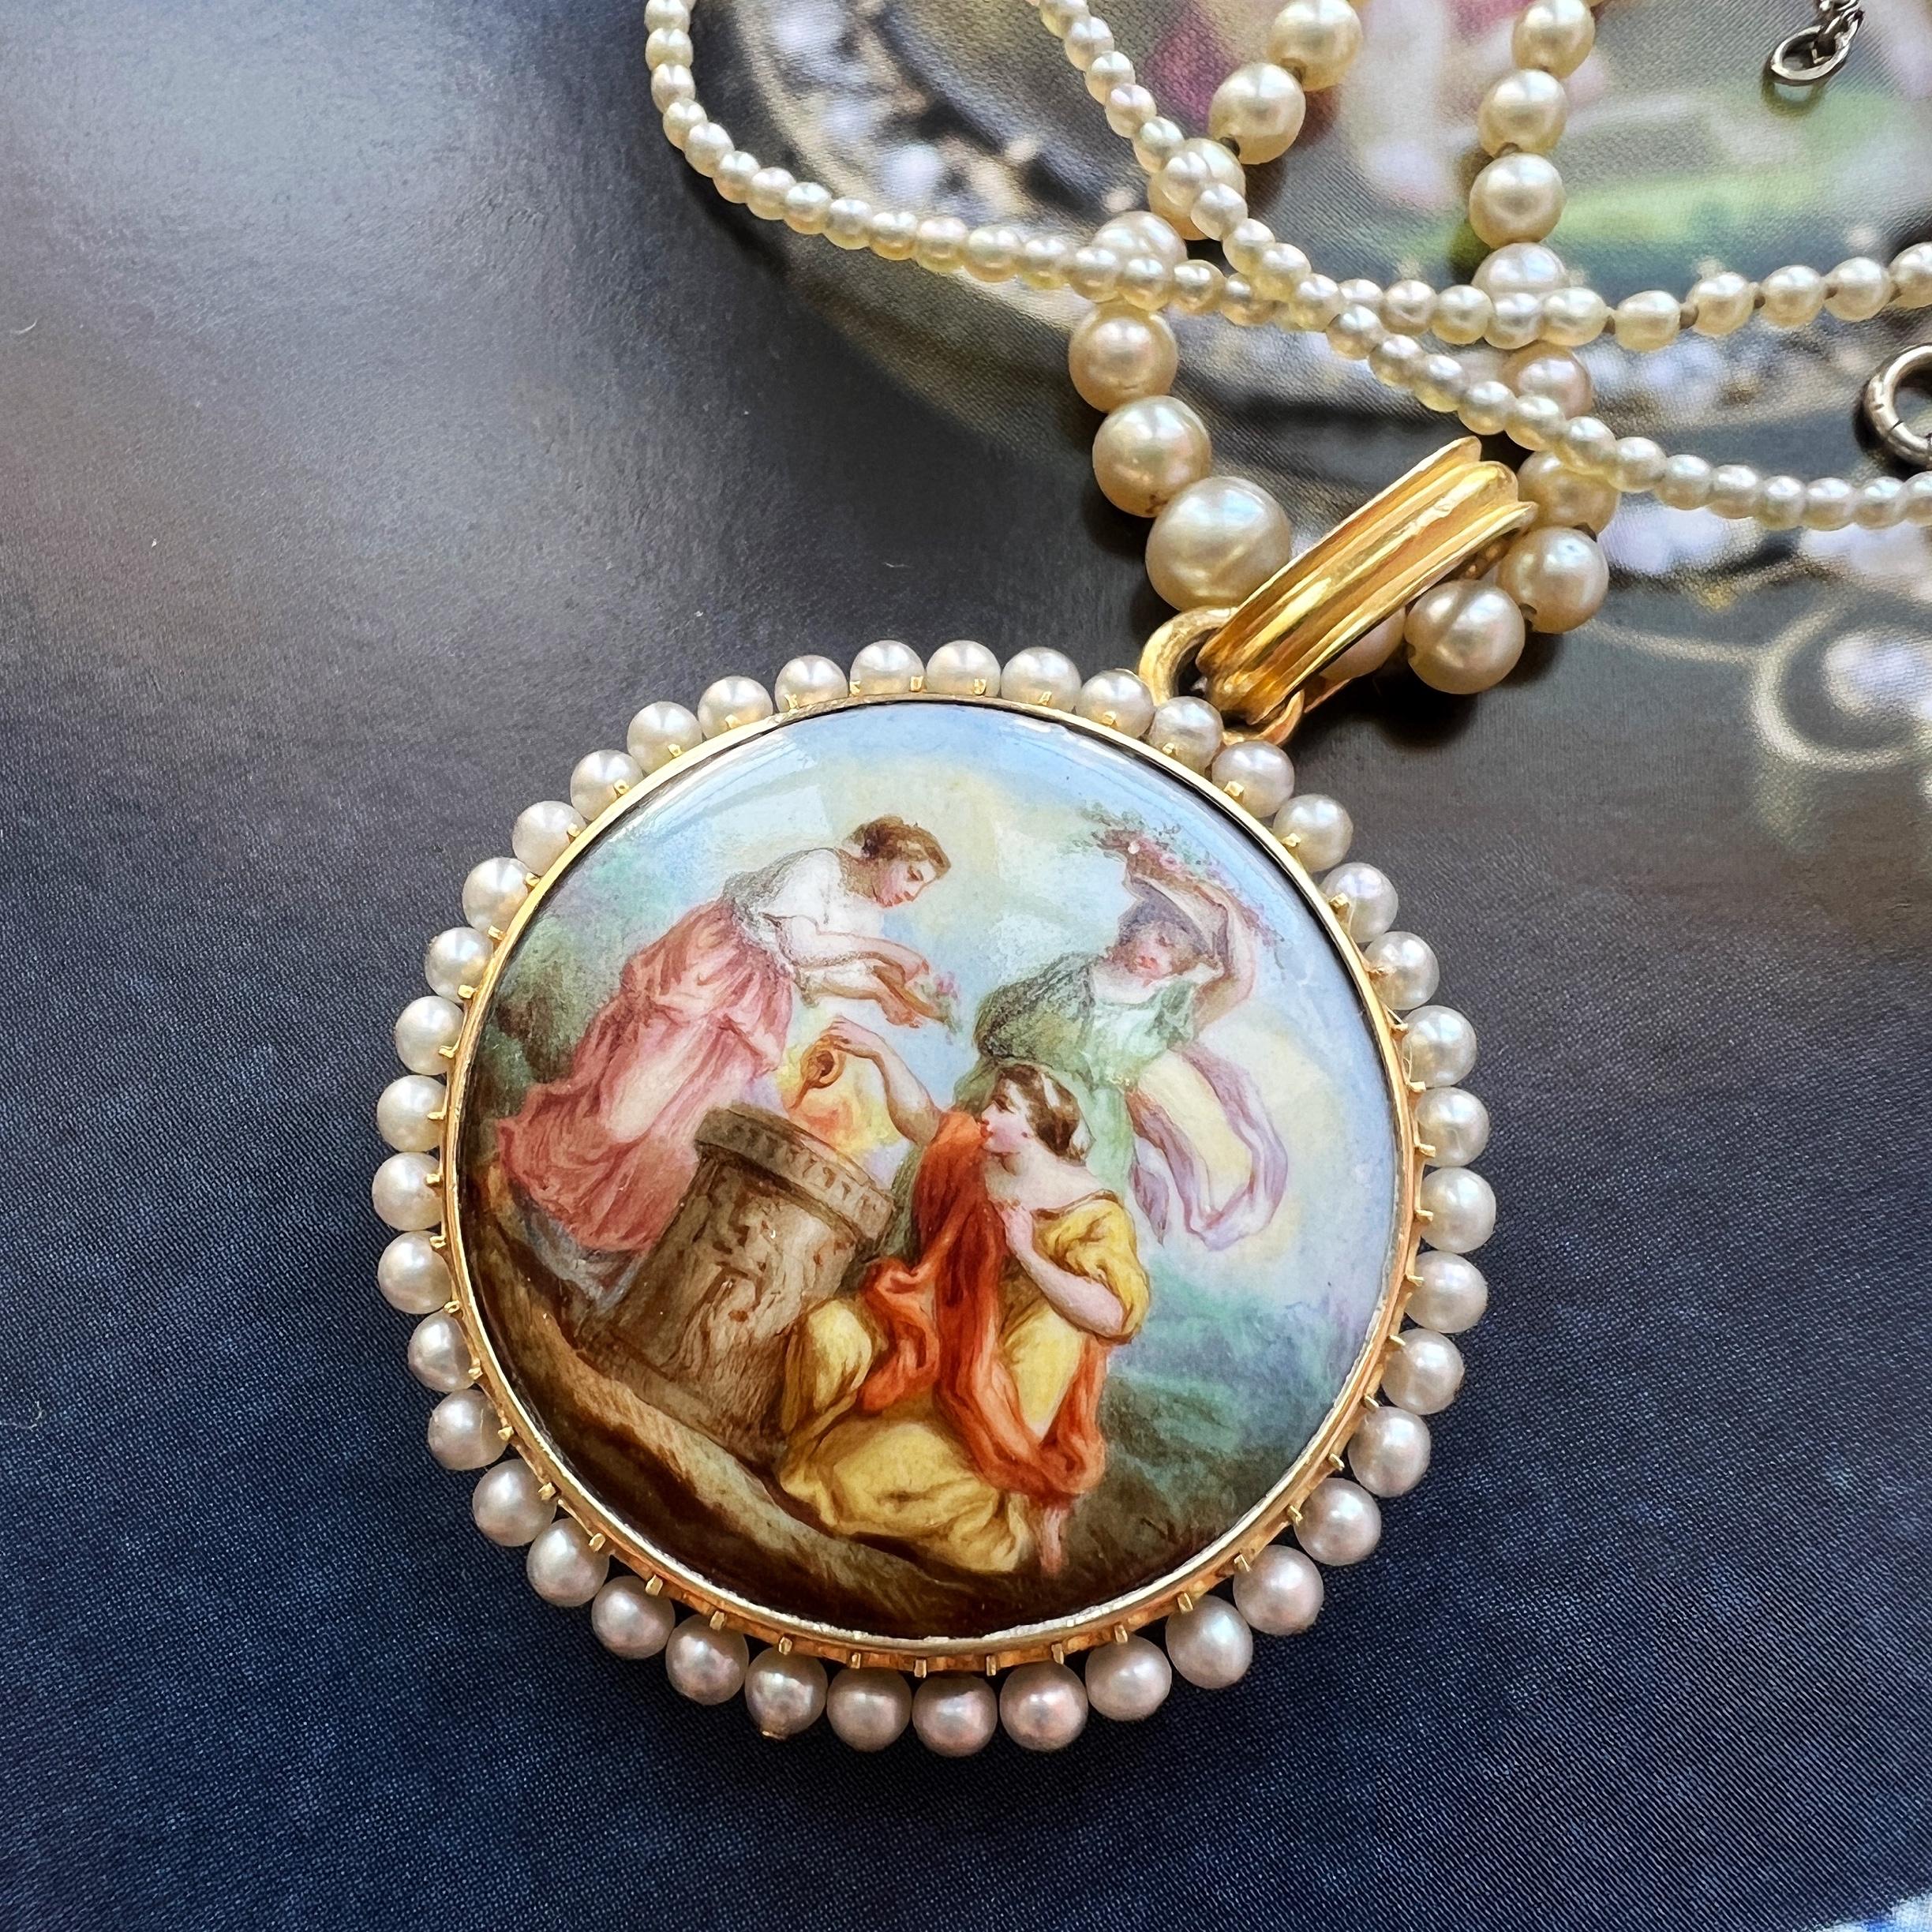 For sale an extraordinary Victorian era enameled miniature portrait locket pendant, a true masterpiece that encapsulates the essence of love, faith, and artistic splendor. This exquisite pendant features a captivating scene of three women standing